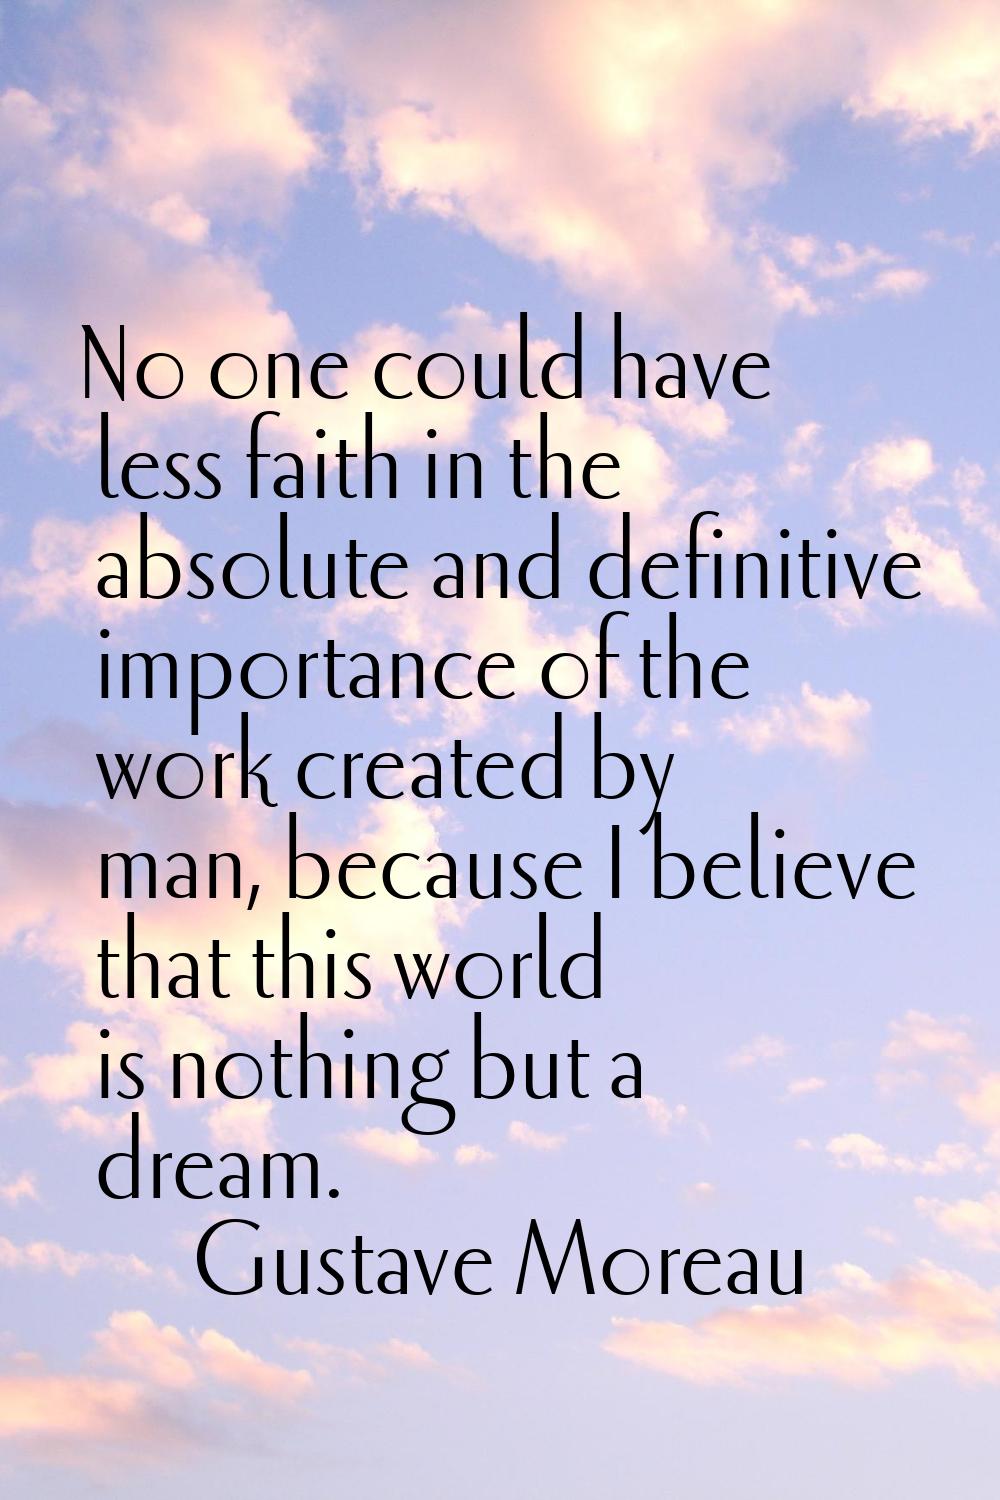 No one could have less faith in the absolute and definitive importance of the work created by man, 